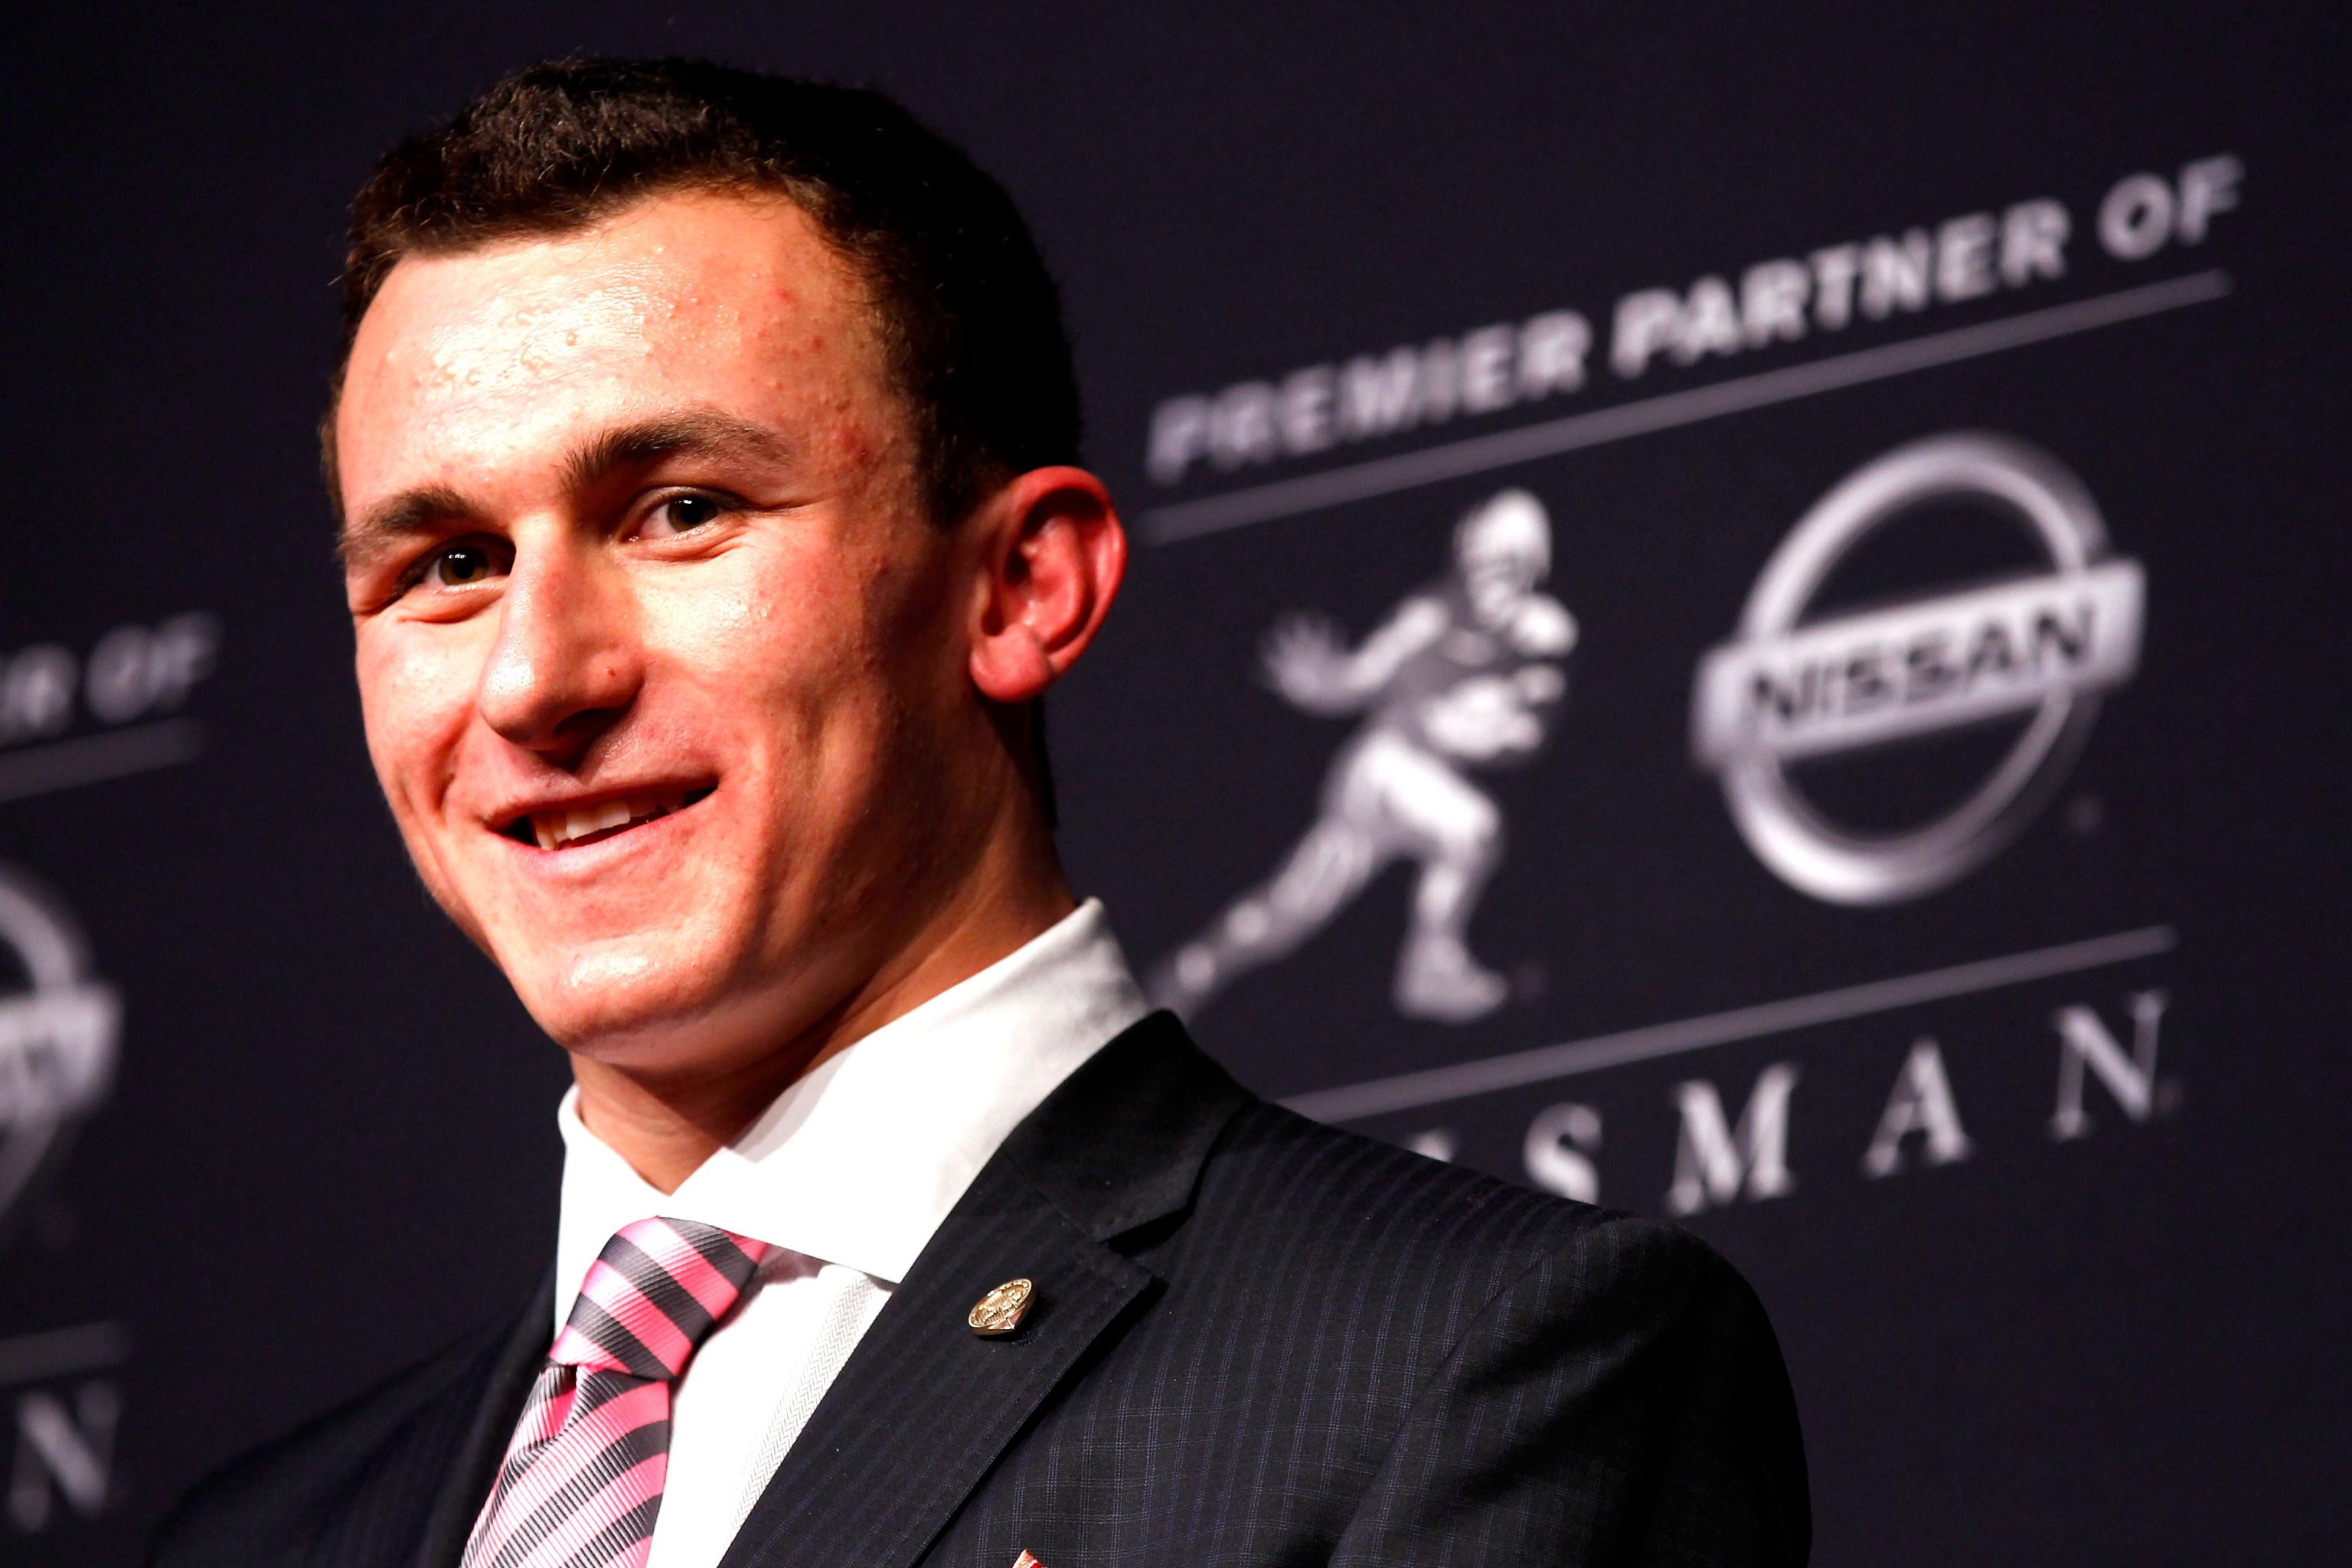 Johnny Manziel Rolled Up to the Club with a Fuzzy $6,000 Backpack Because  He's Johnny Manziel